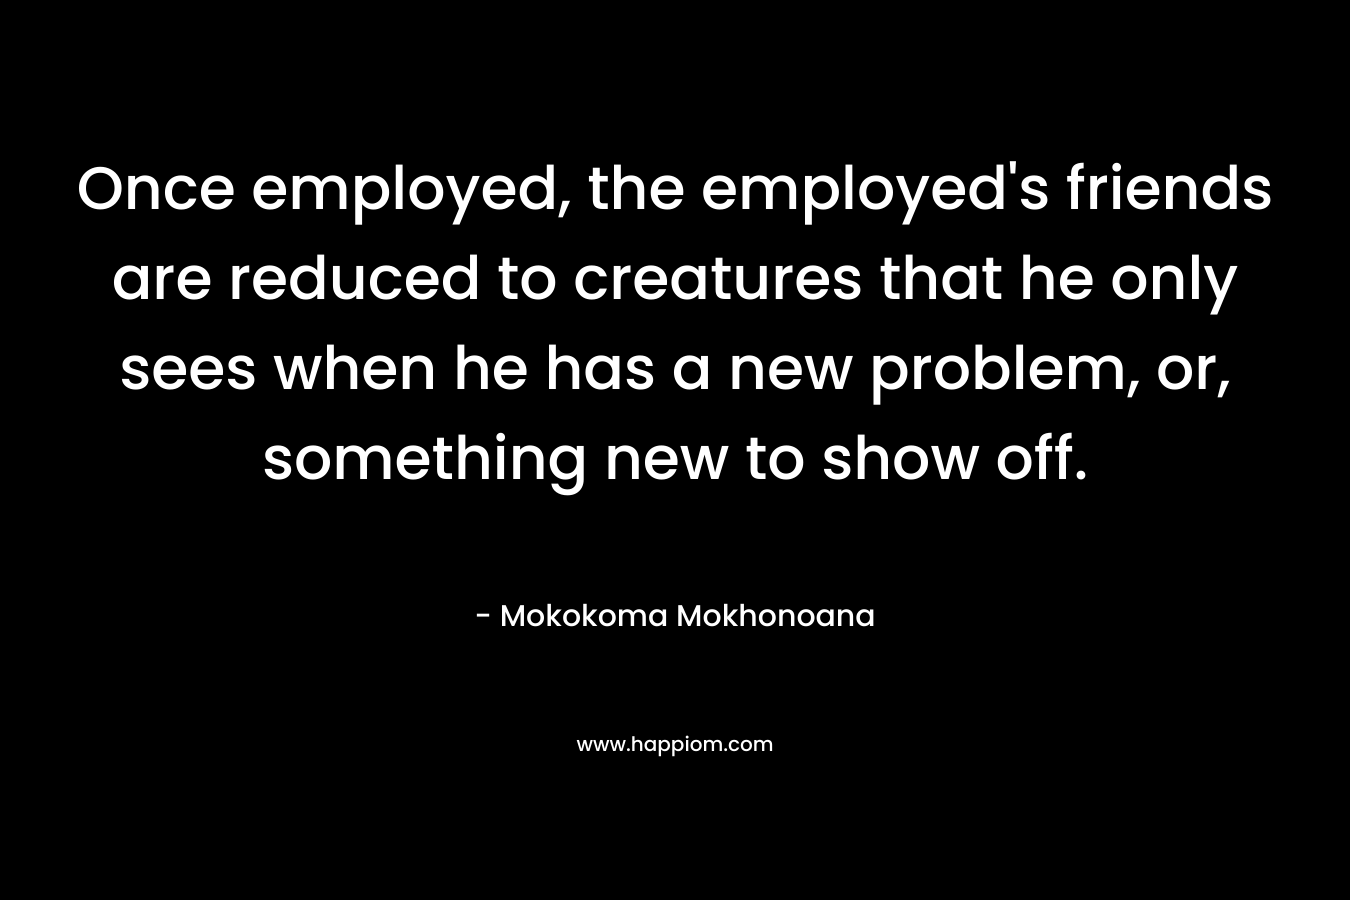 Once employed, the employed's friends are reduced to creatures that he only sees when he has a new problem, or, something new to show off.